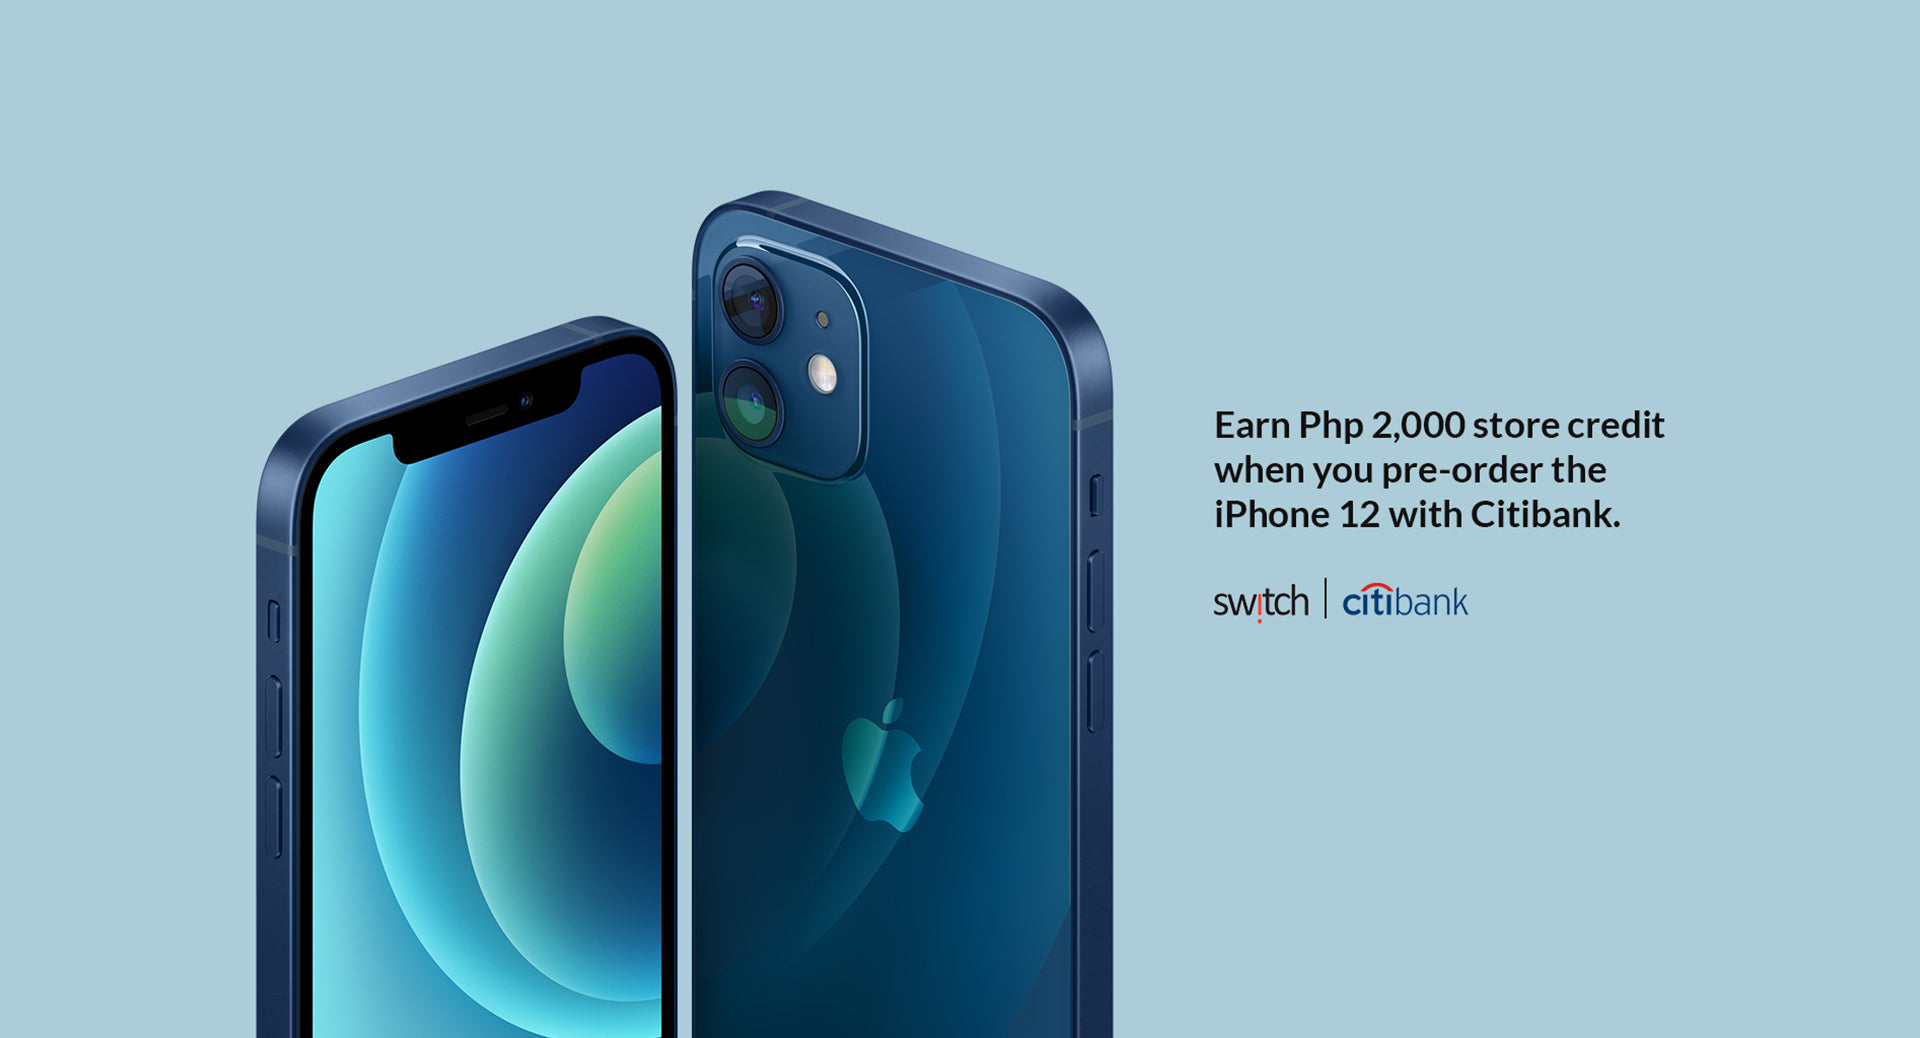 Citibank cardholders get a P2K voucher for iPhone 12 purchases at Switch.